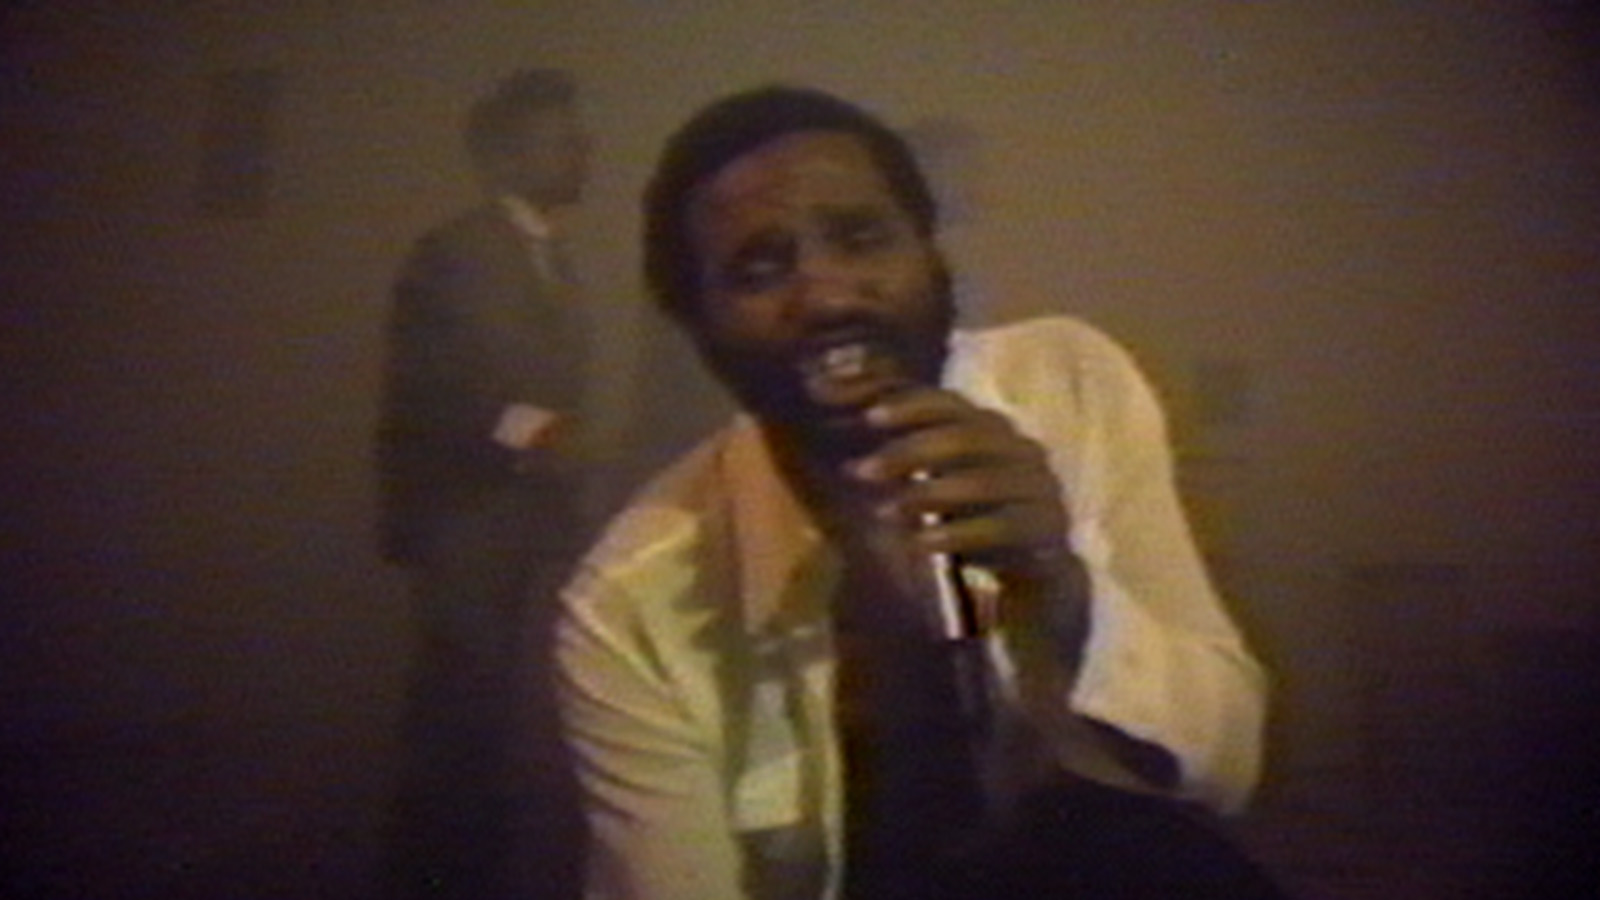 Ulysses Jenkins in front of mic